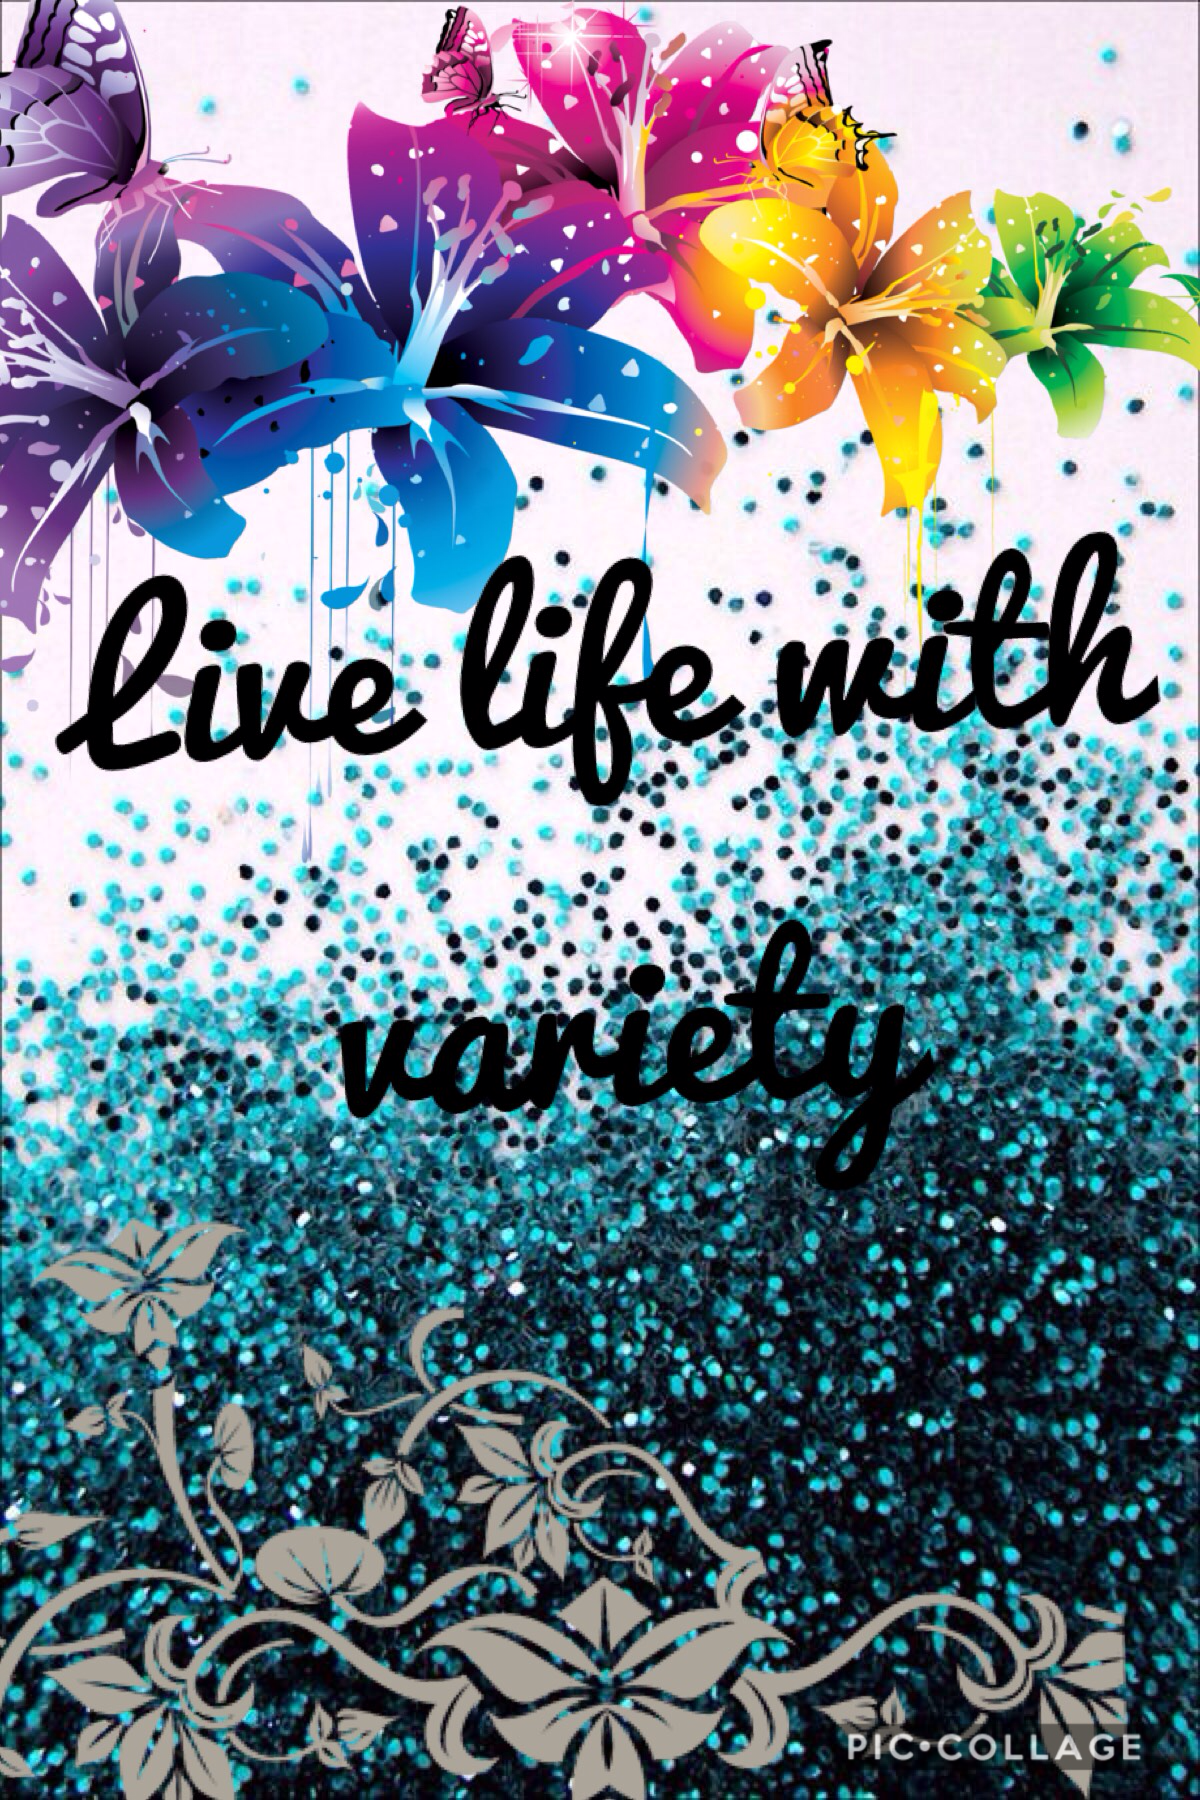 Live life with variety